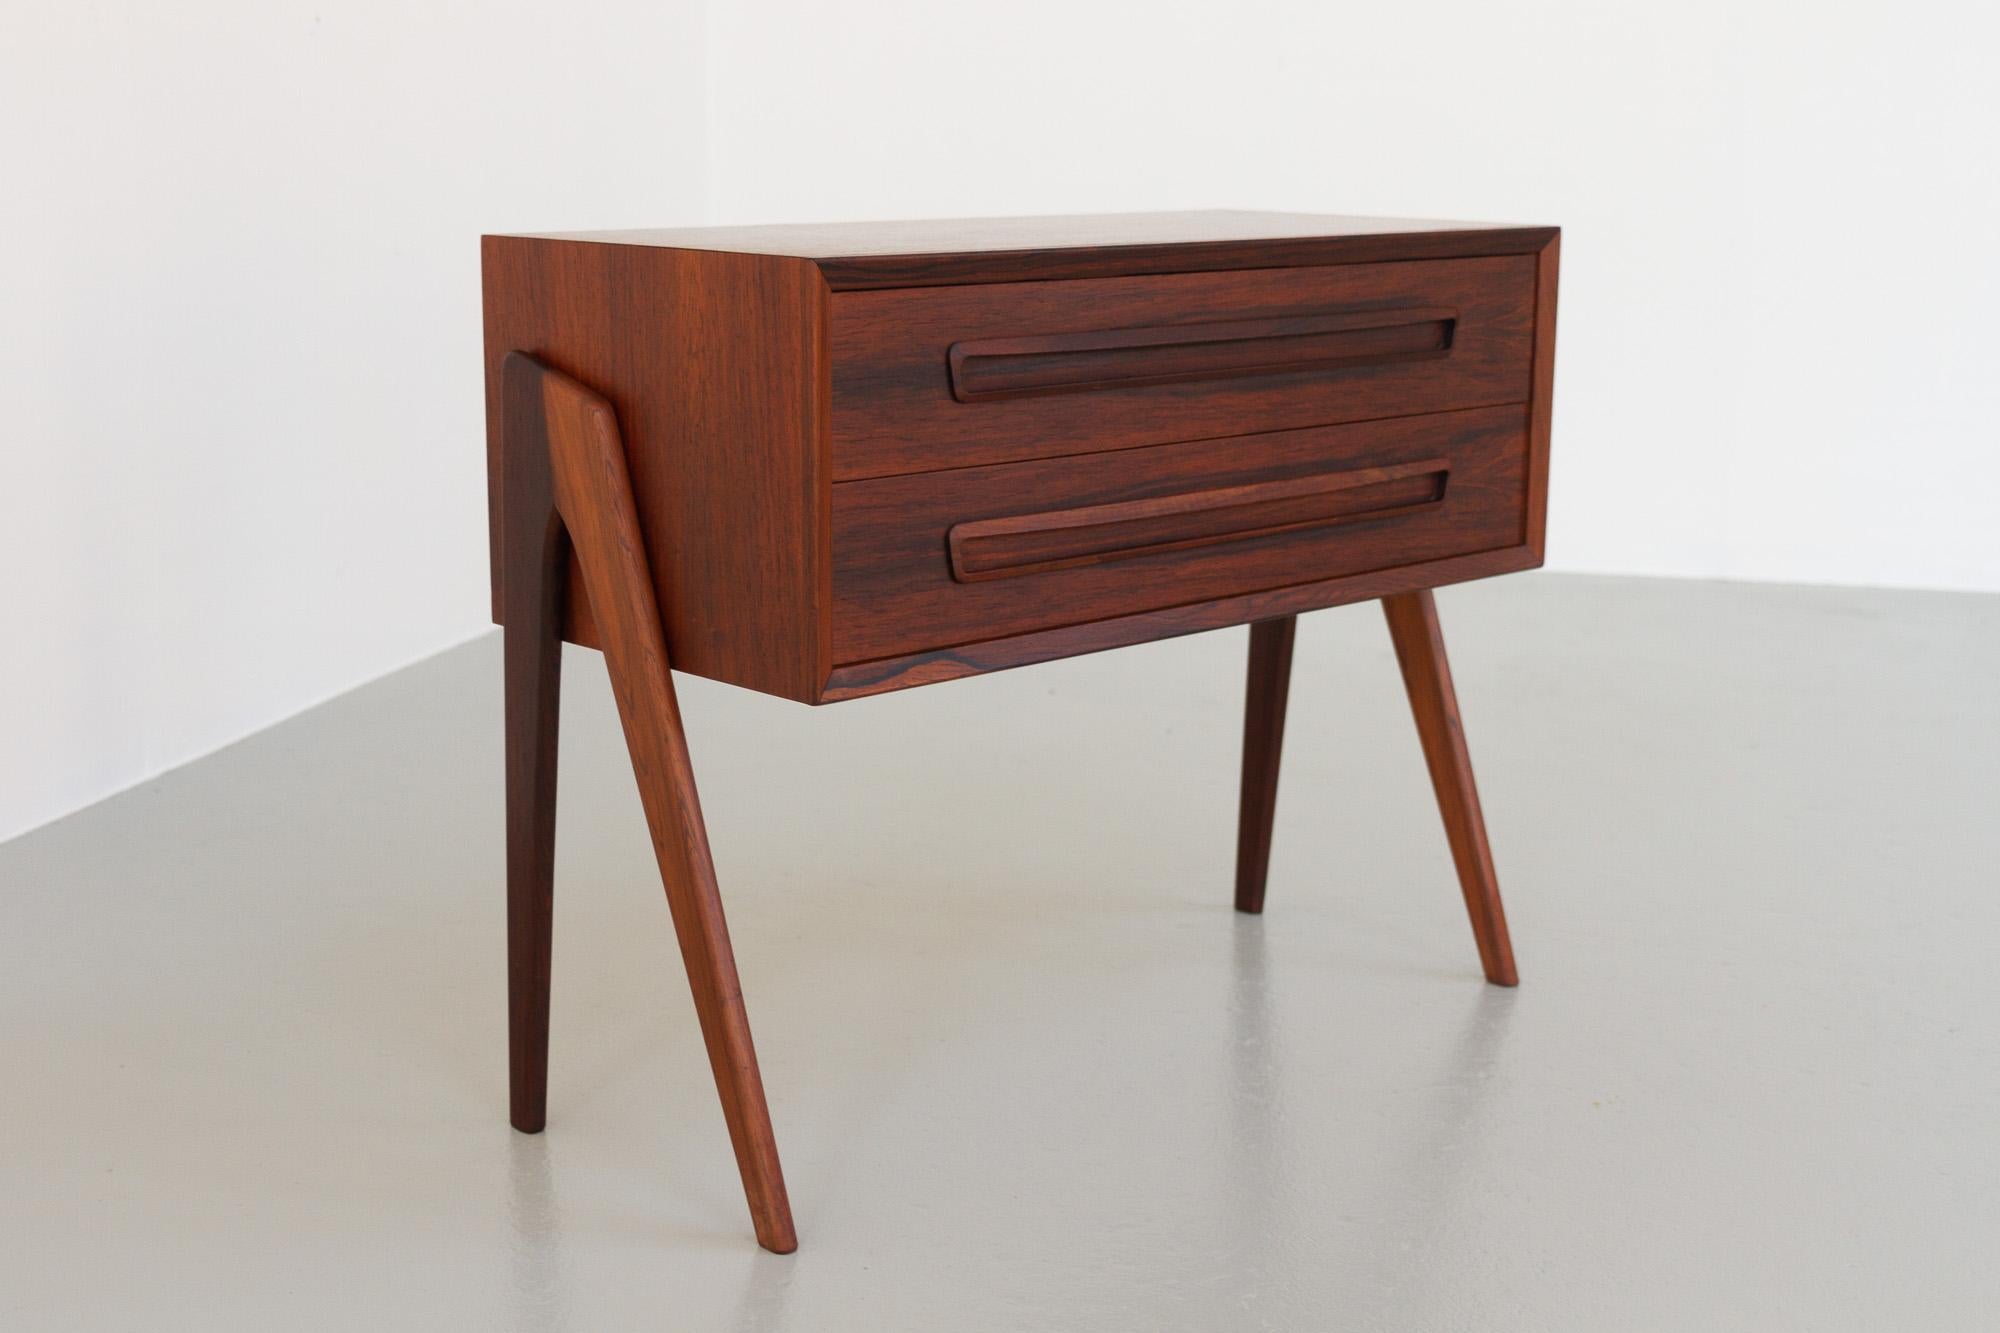 Vintage Danish Modern Rosewood night stand by AP Møbler Svenstrup, 1960s.

Elegant and stylish night stand in very beautiful rich and expressive Rosewood veneer designed by Andreas Pedersen and manufactured at AP Møbler Svenstrup (AP Furniture),